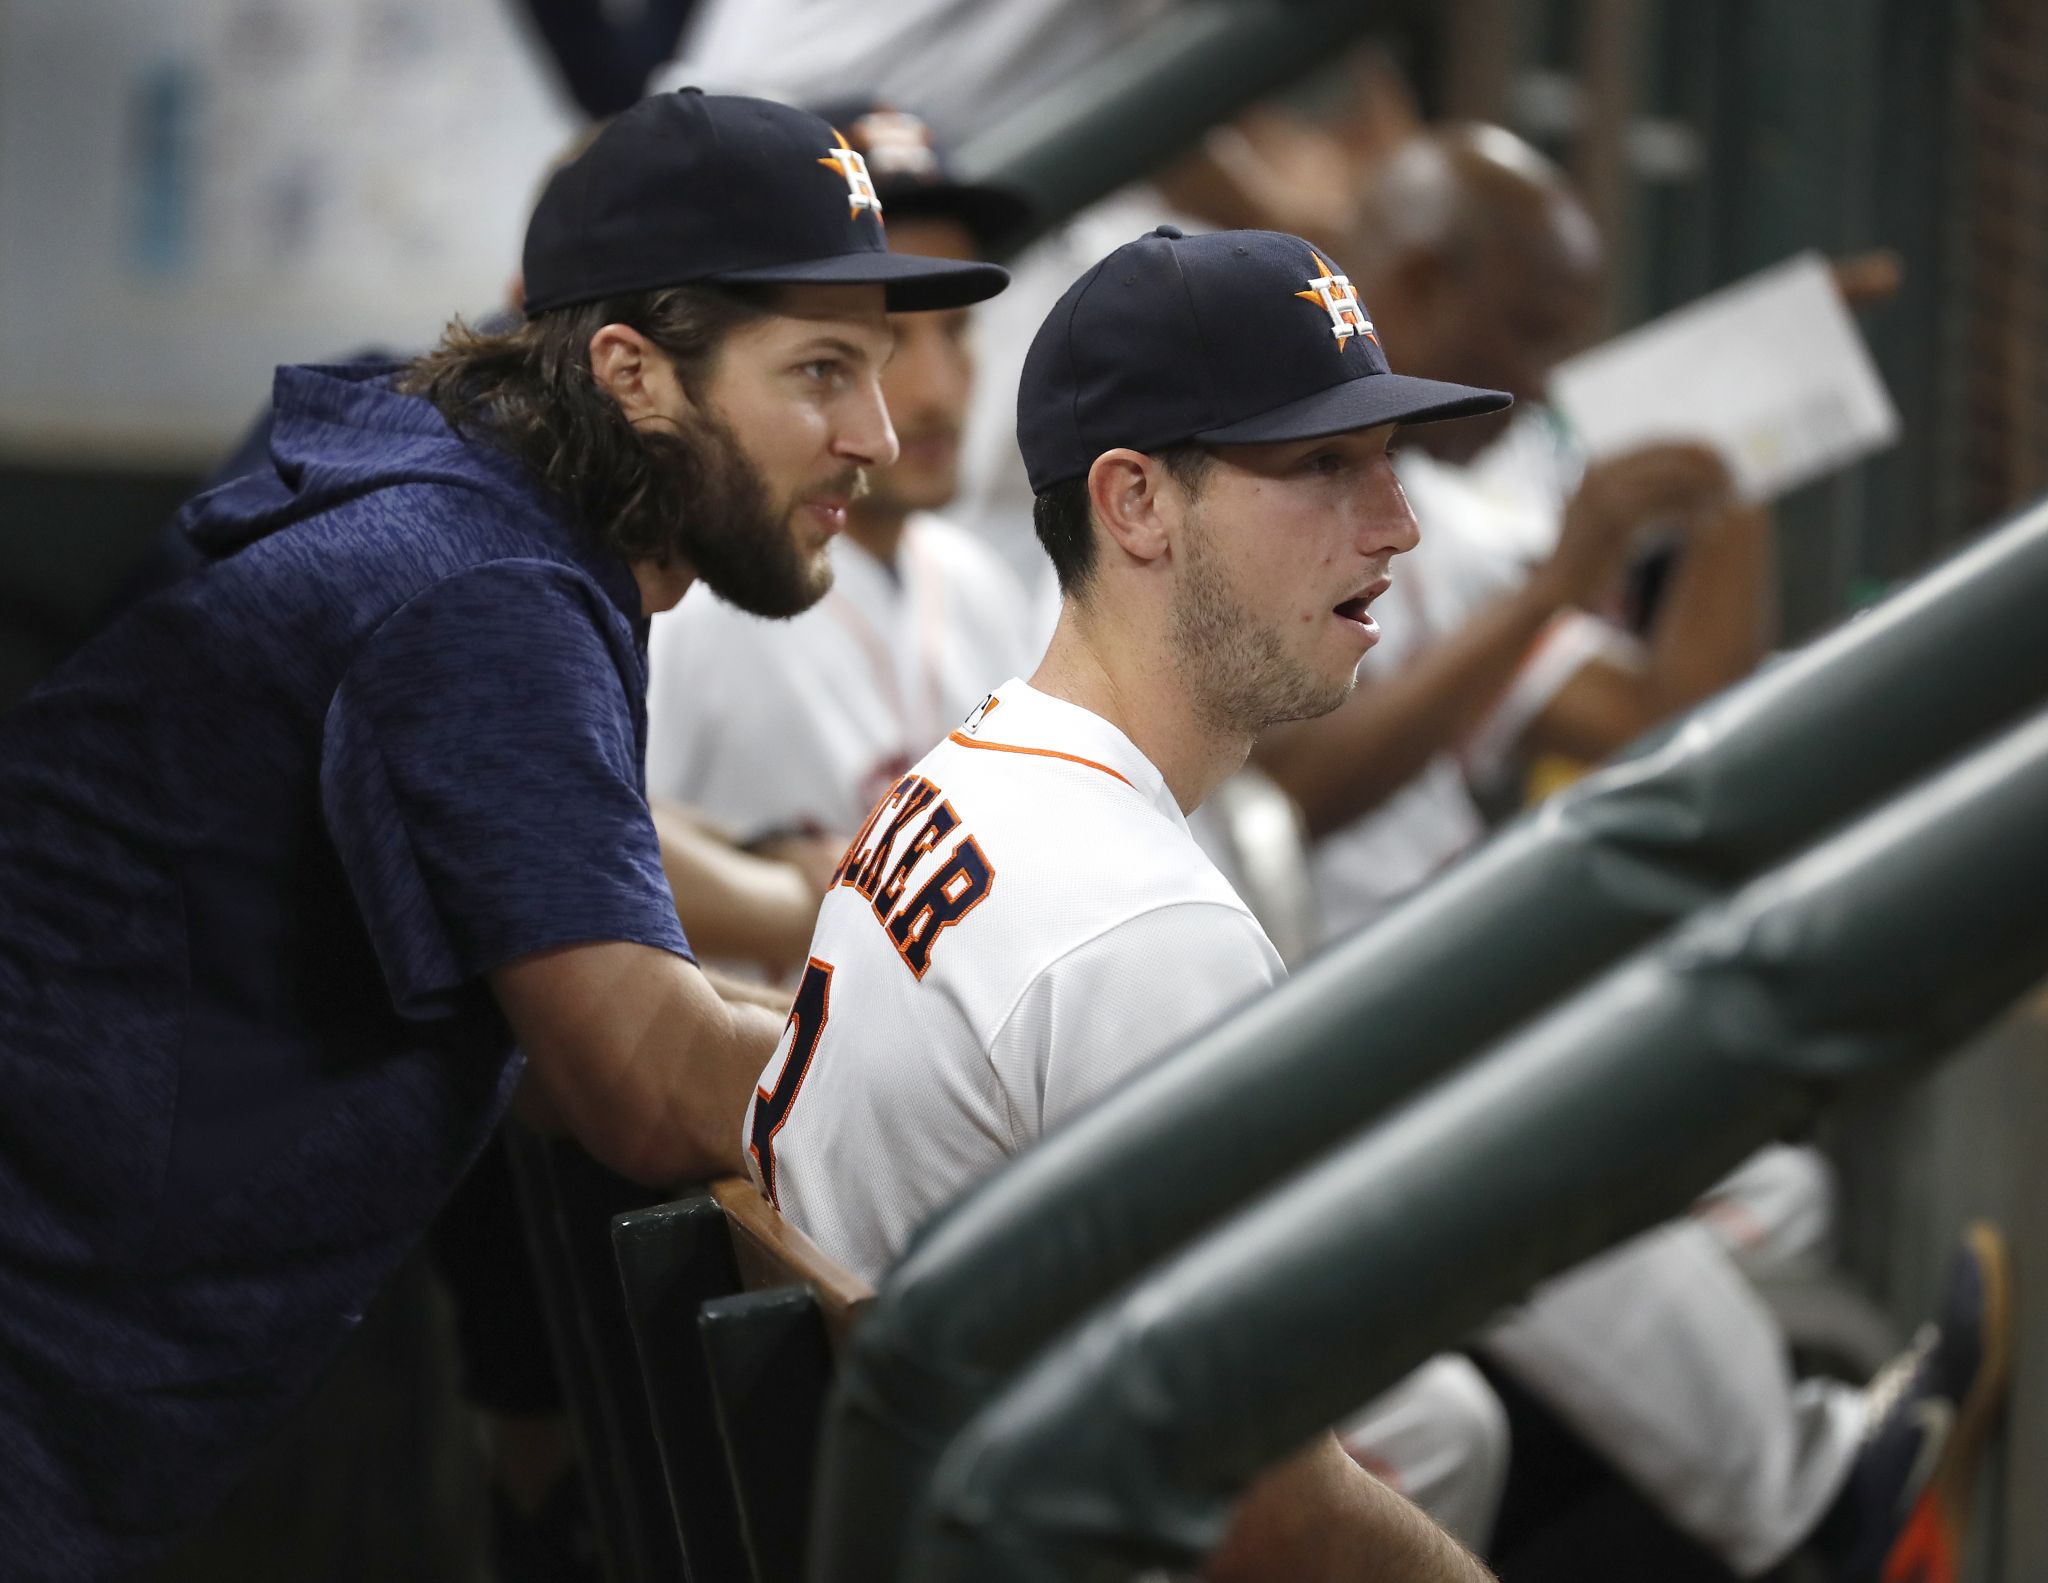 A.J. Hinch: Astros' Jake Marisnick could be out until September